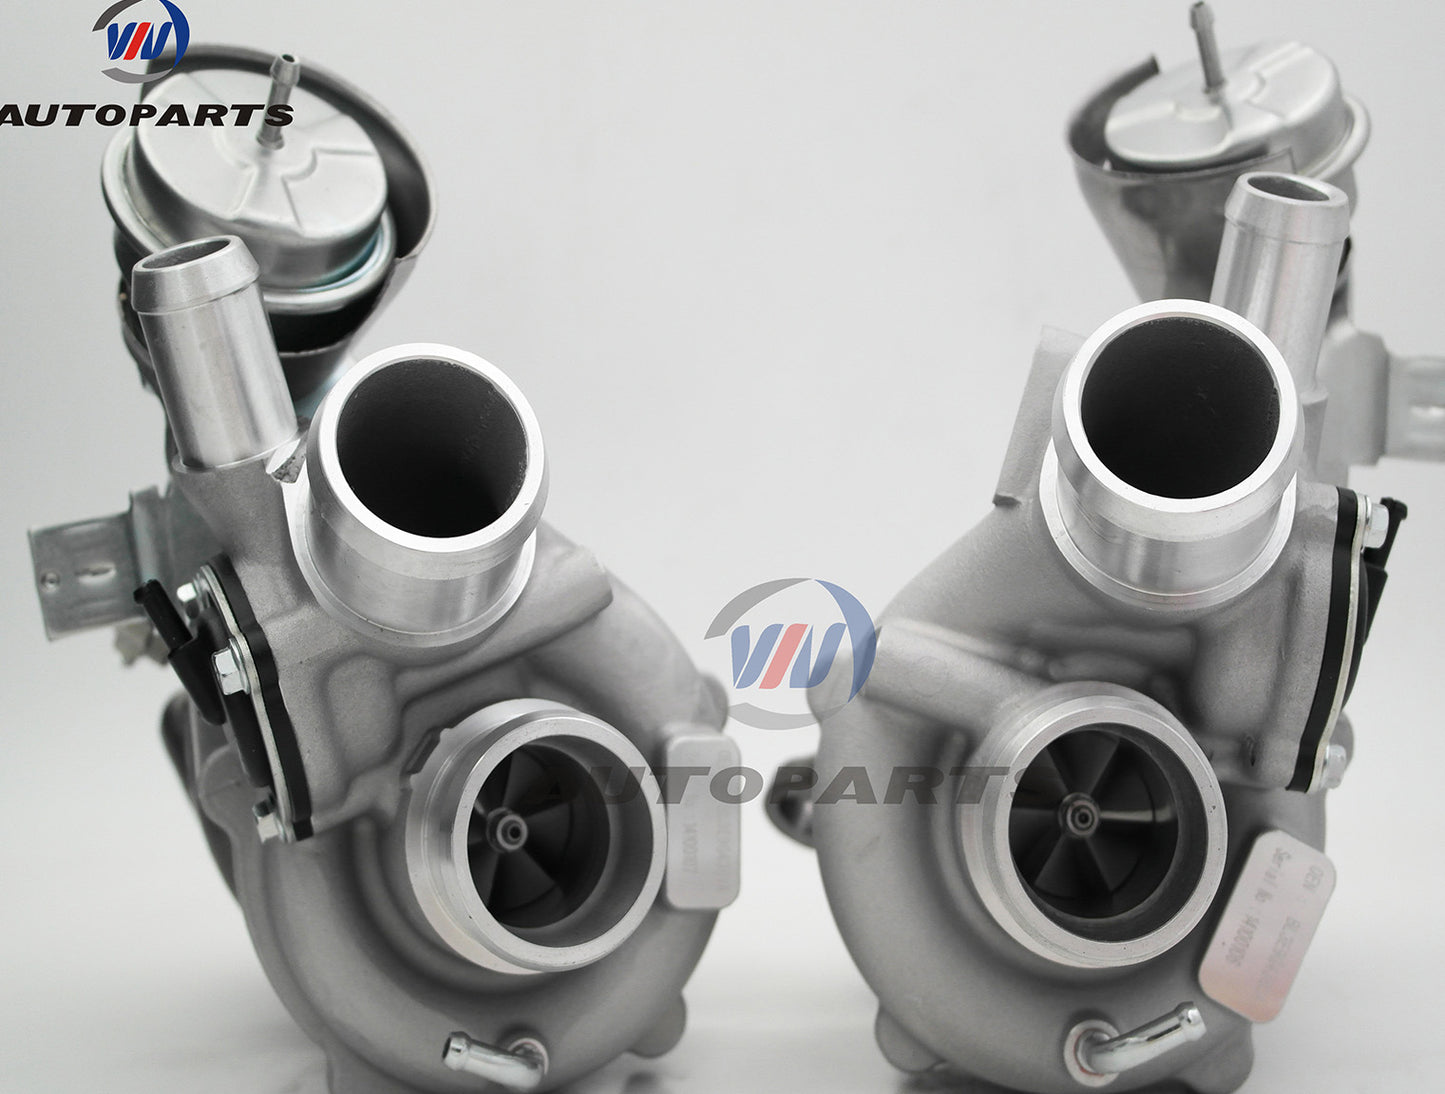 Twin Turbochargers 179204 &179205 For Ford F150 Ecoboost 3.5L 2010-2012 Pair Turbo Kit